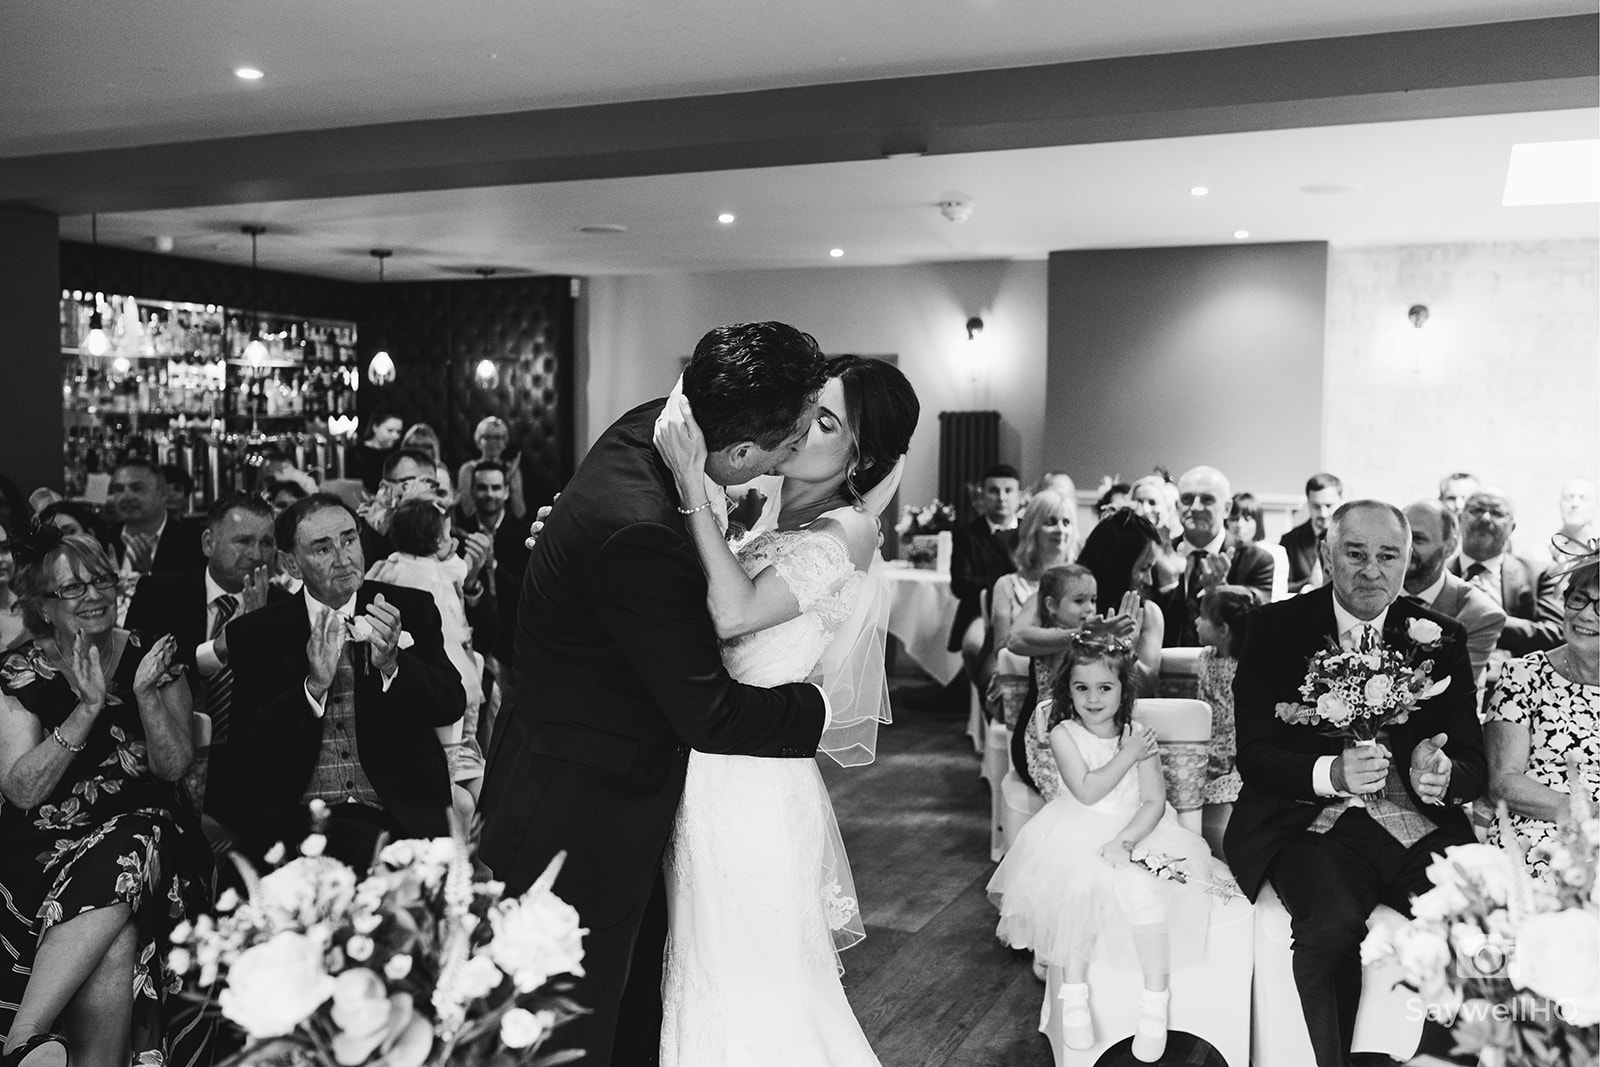 The Chequers Inn Wedding Photography - bride and groom kissed during their wedding ceremony